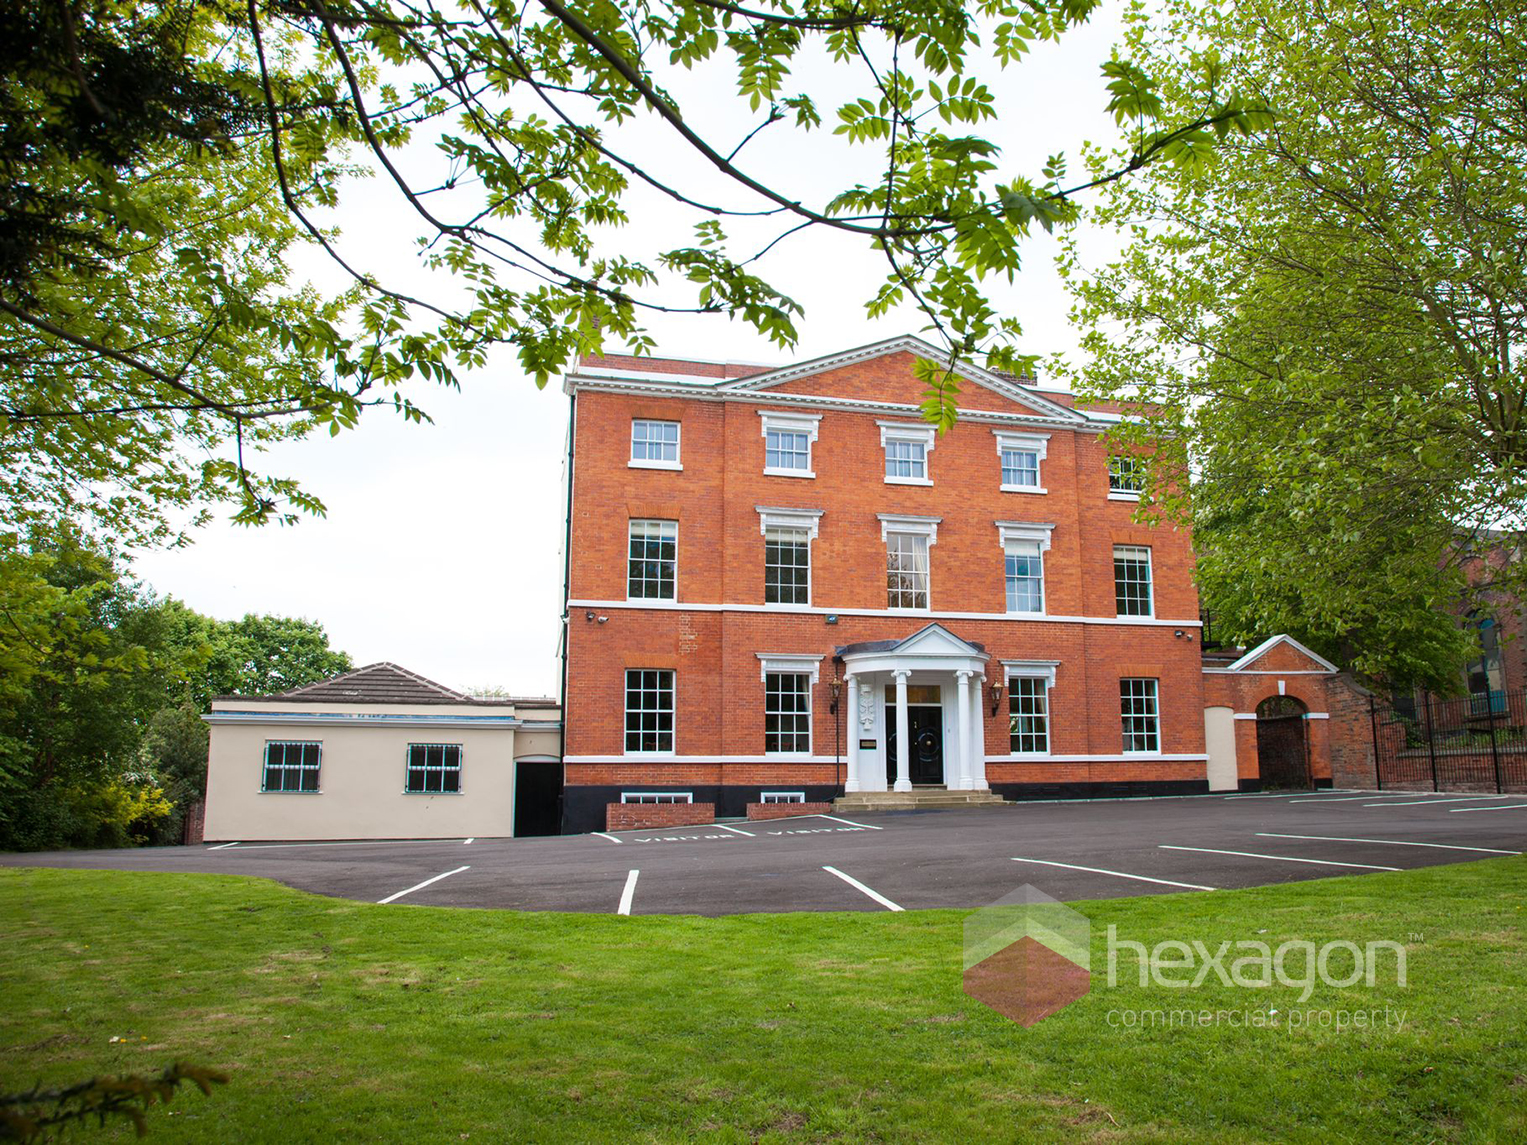 0 bed Serviced Office for rent in Dudley. From Hexagon Commercial Property